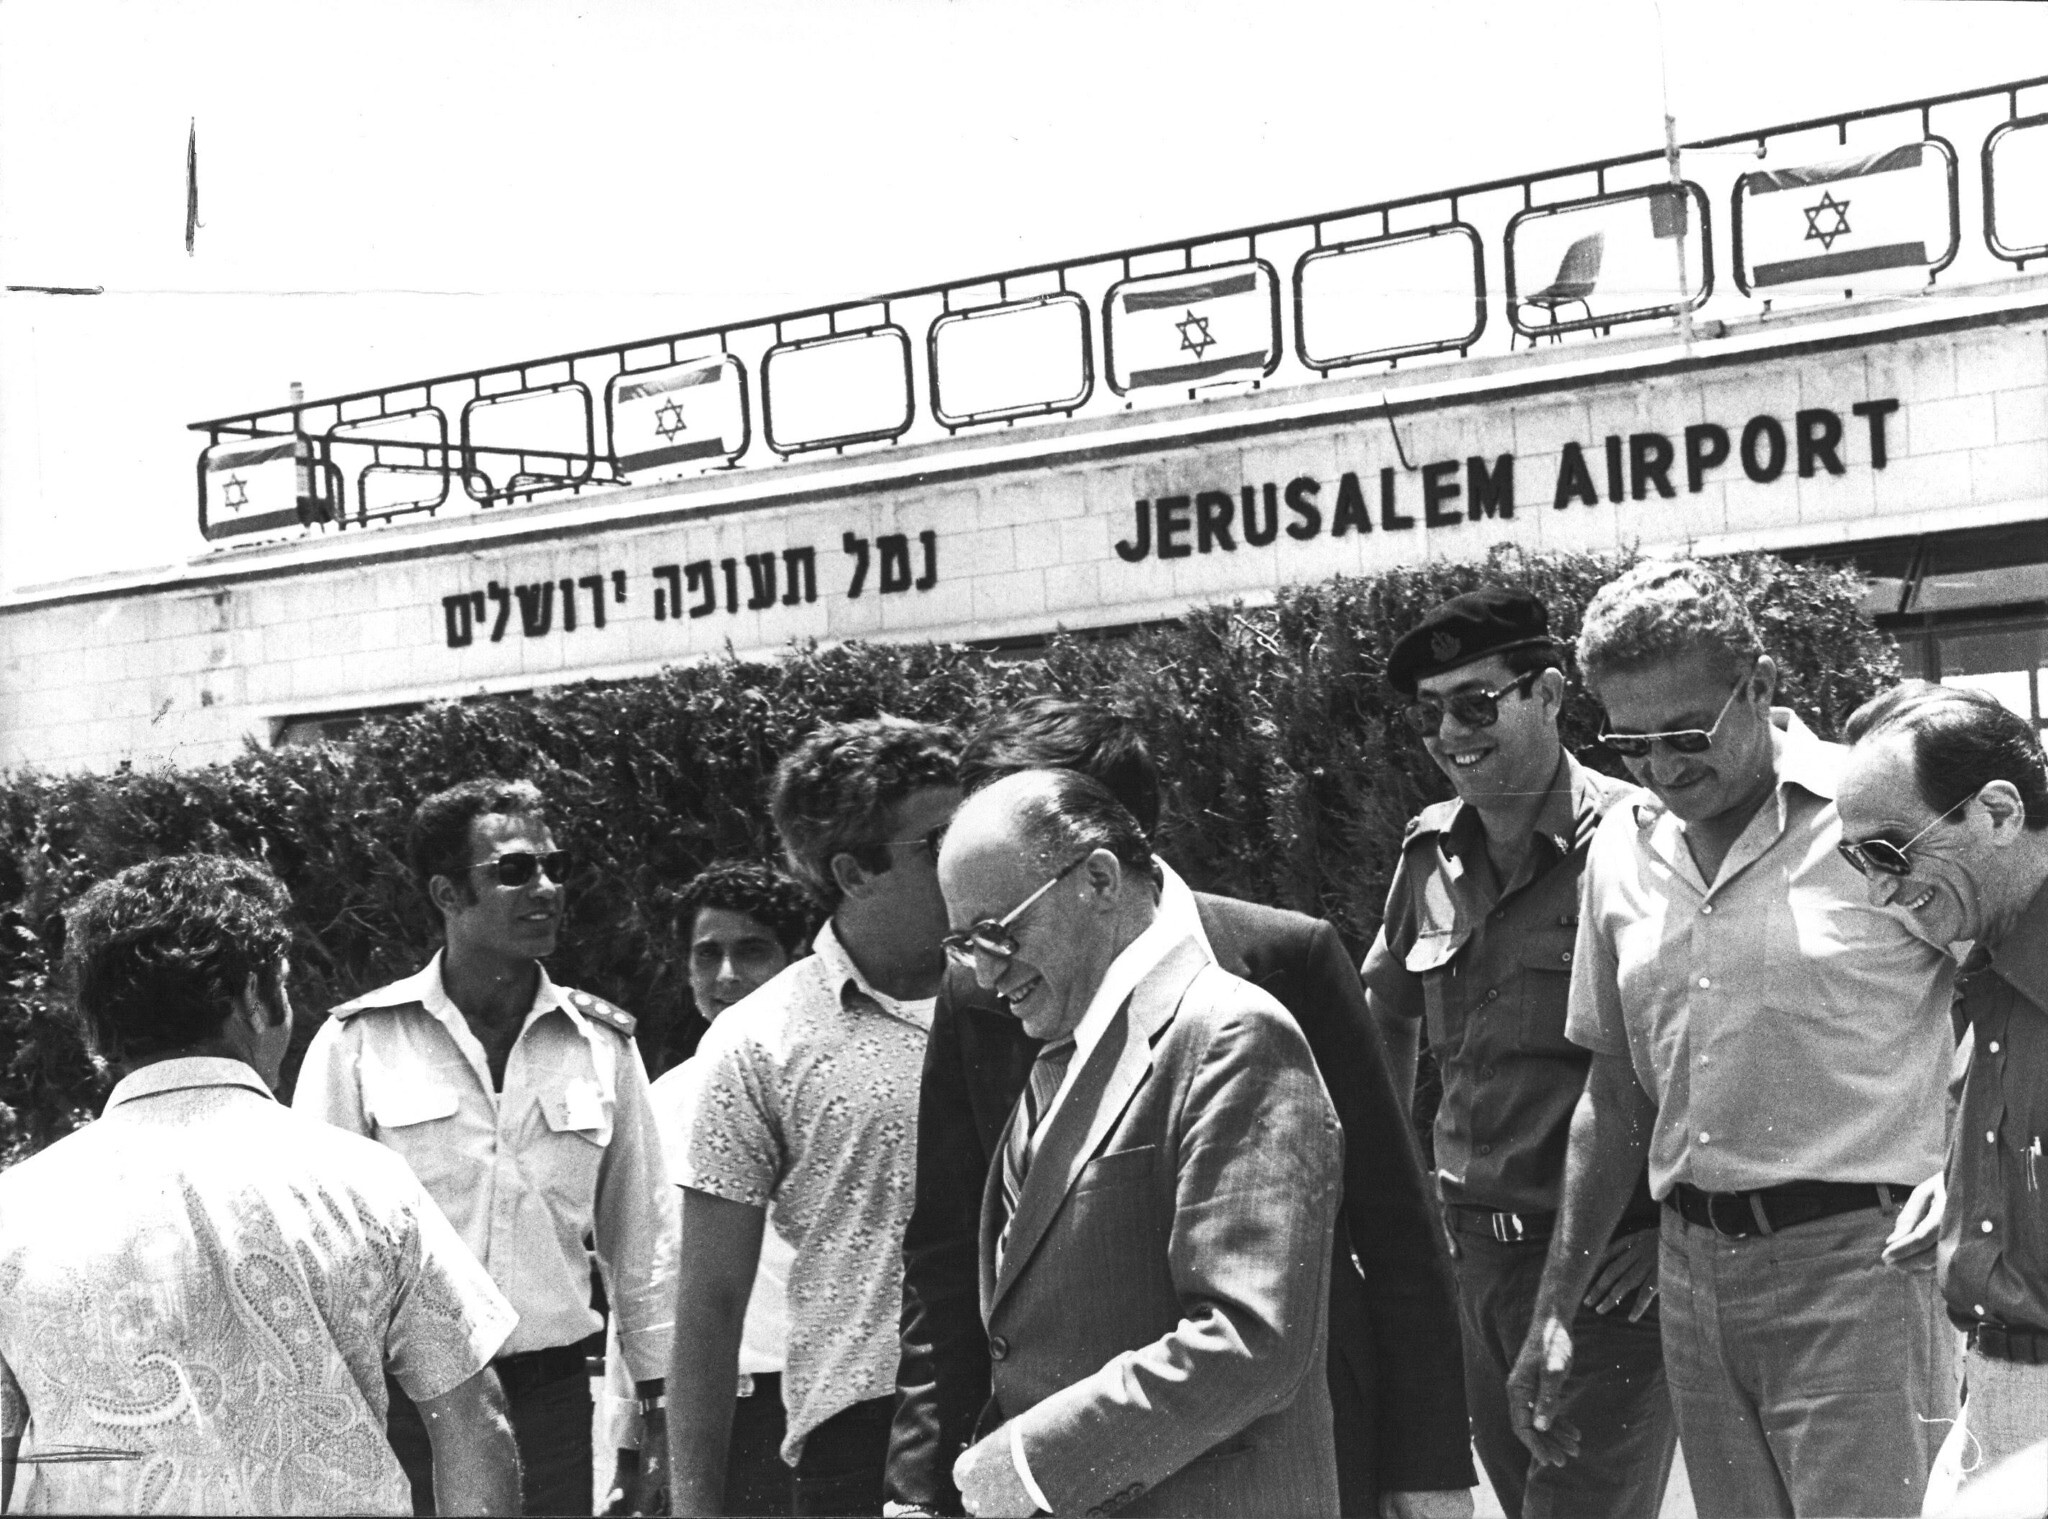 Prime minister Menachem Begin (center), defense minister Ezer Weizmann (second right) and other Israeli officials return to Atarot Airport from talks in Egypt with president Anwar Sadat, 12/7/1978 (Eliyahu Hershkowitz)